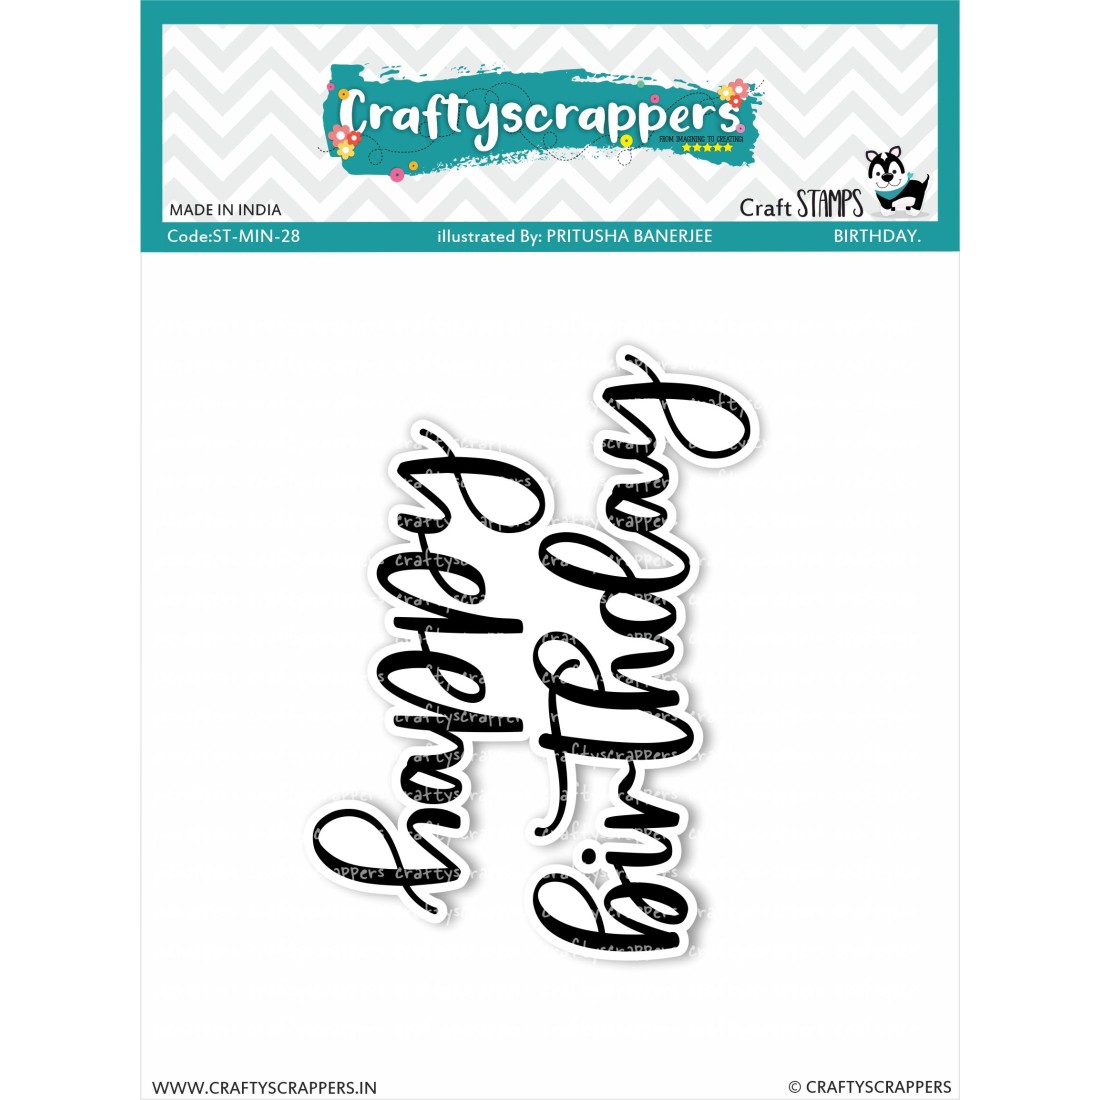 Craftyscrappers Mini Stamps- BIRTHDAY